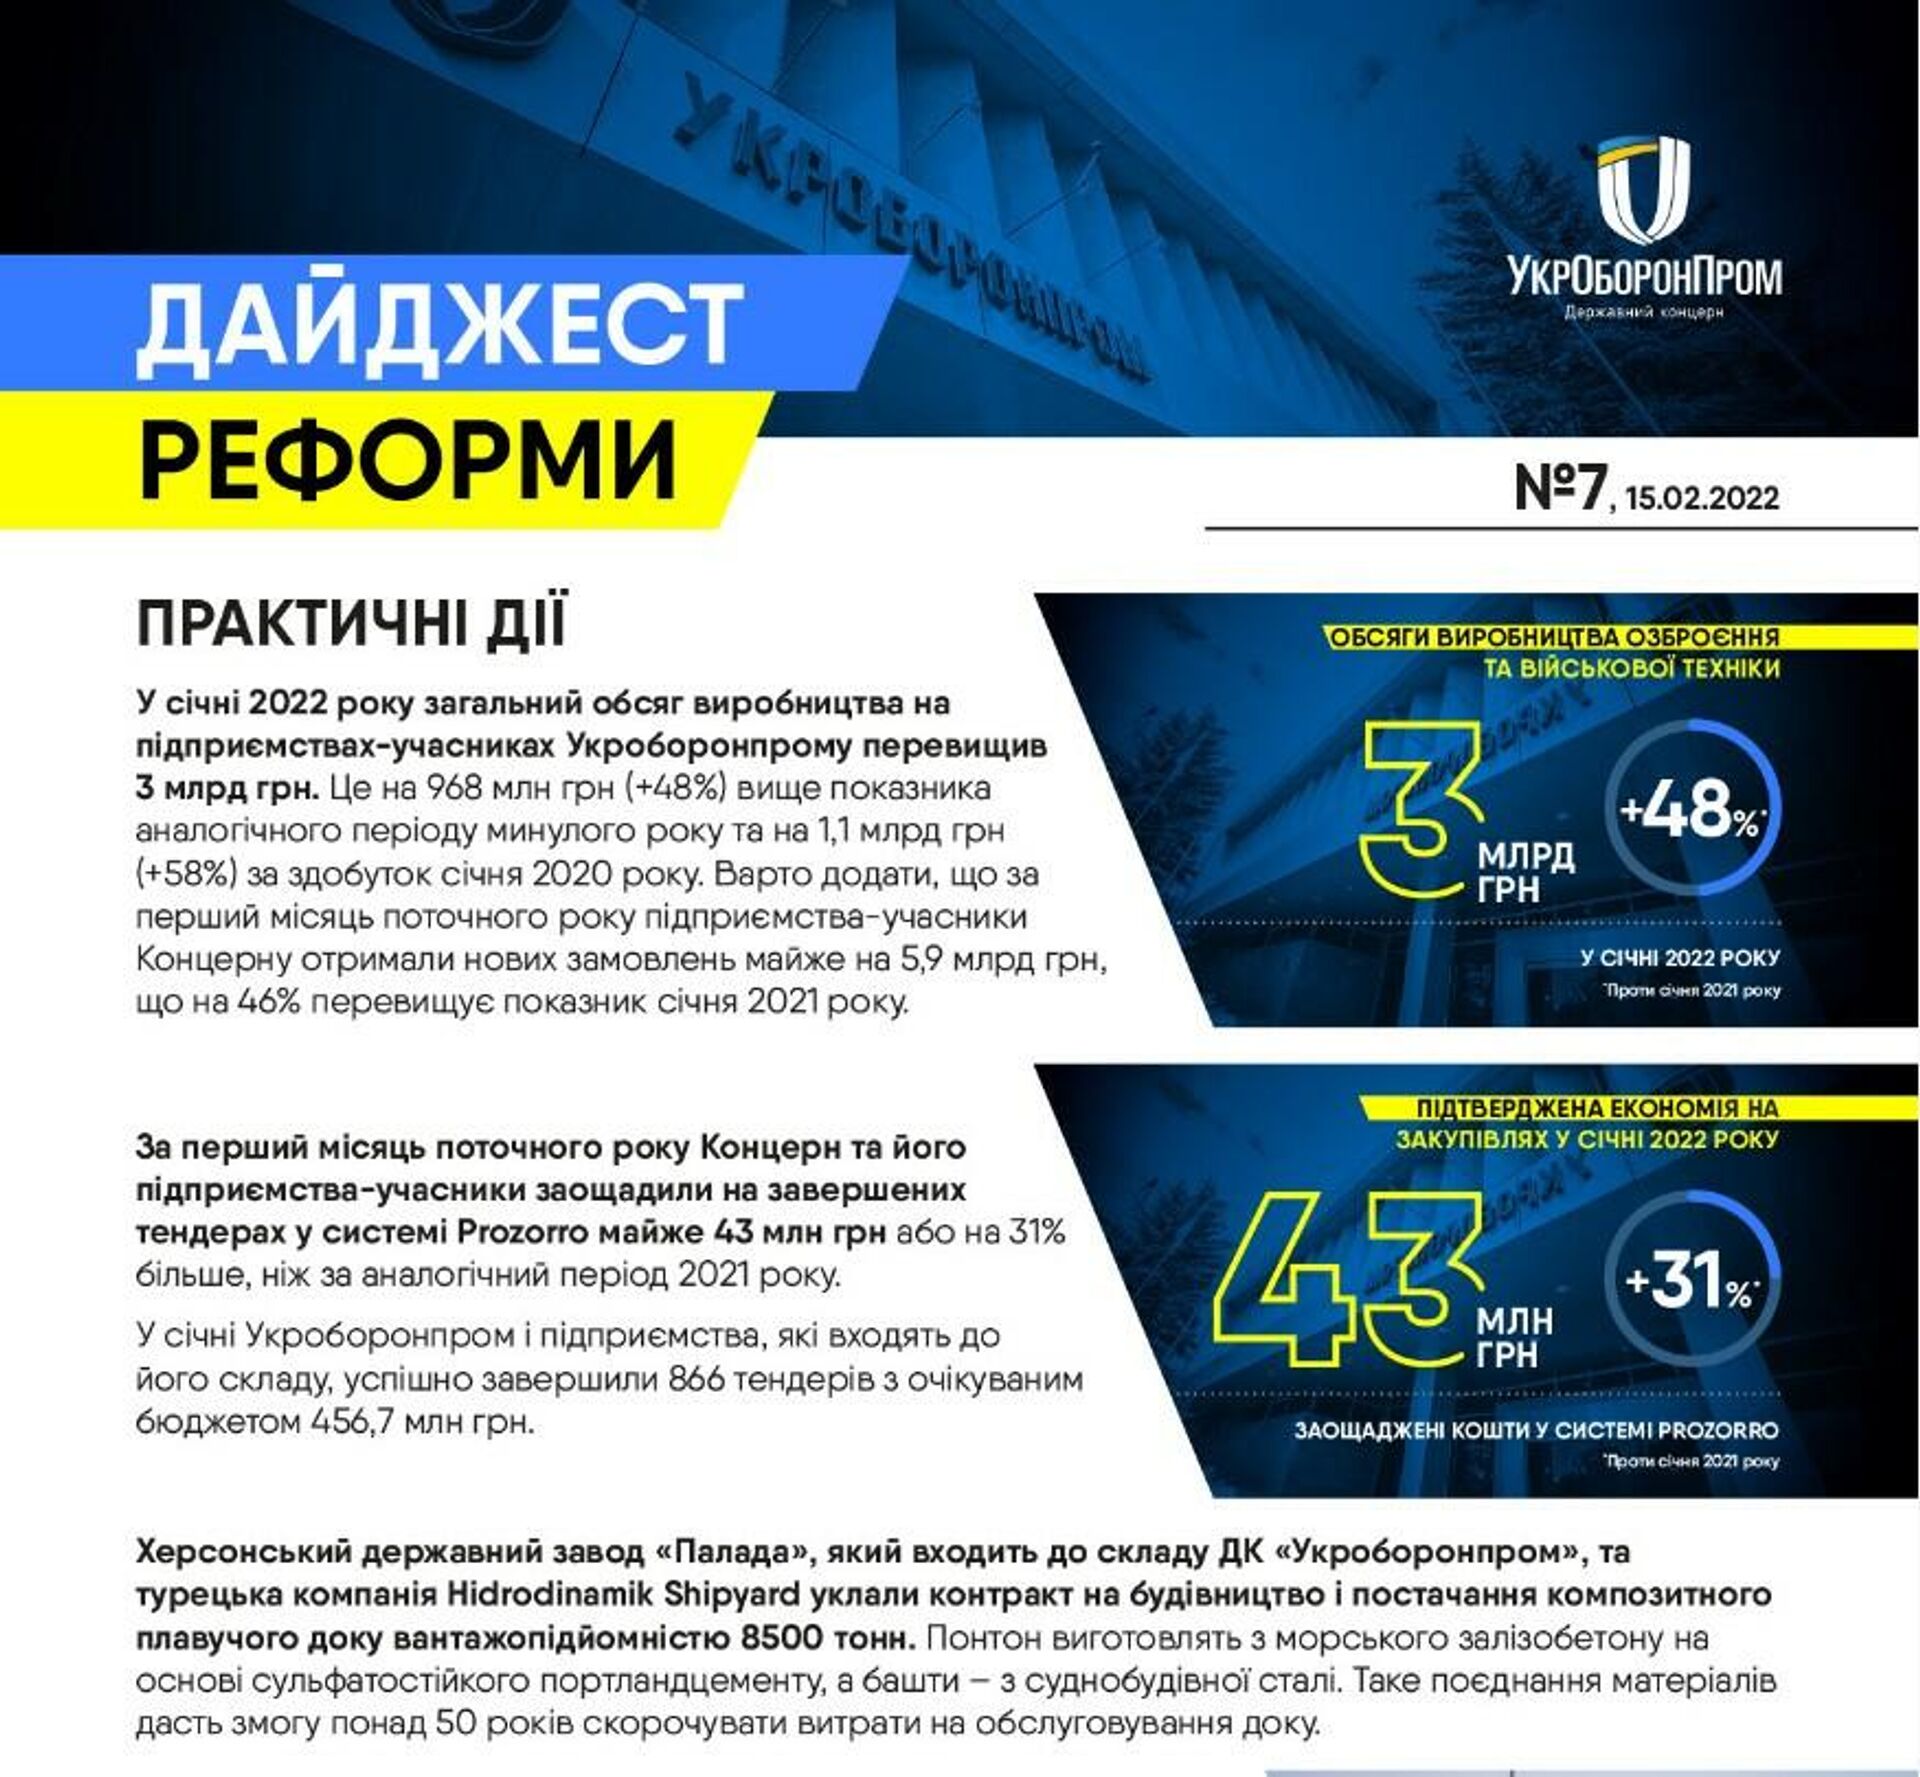 Excerpts from Ukroboronprom's digests for 2022. Increase in military production volumes in January 2022 compared to 2021 and 2020. This digest was only available in the Ukrainian language. - Sputnik International, 1920, 11.03.2022